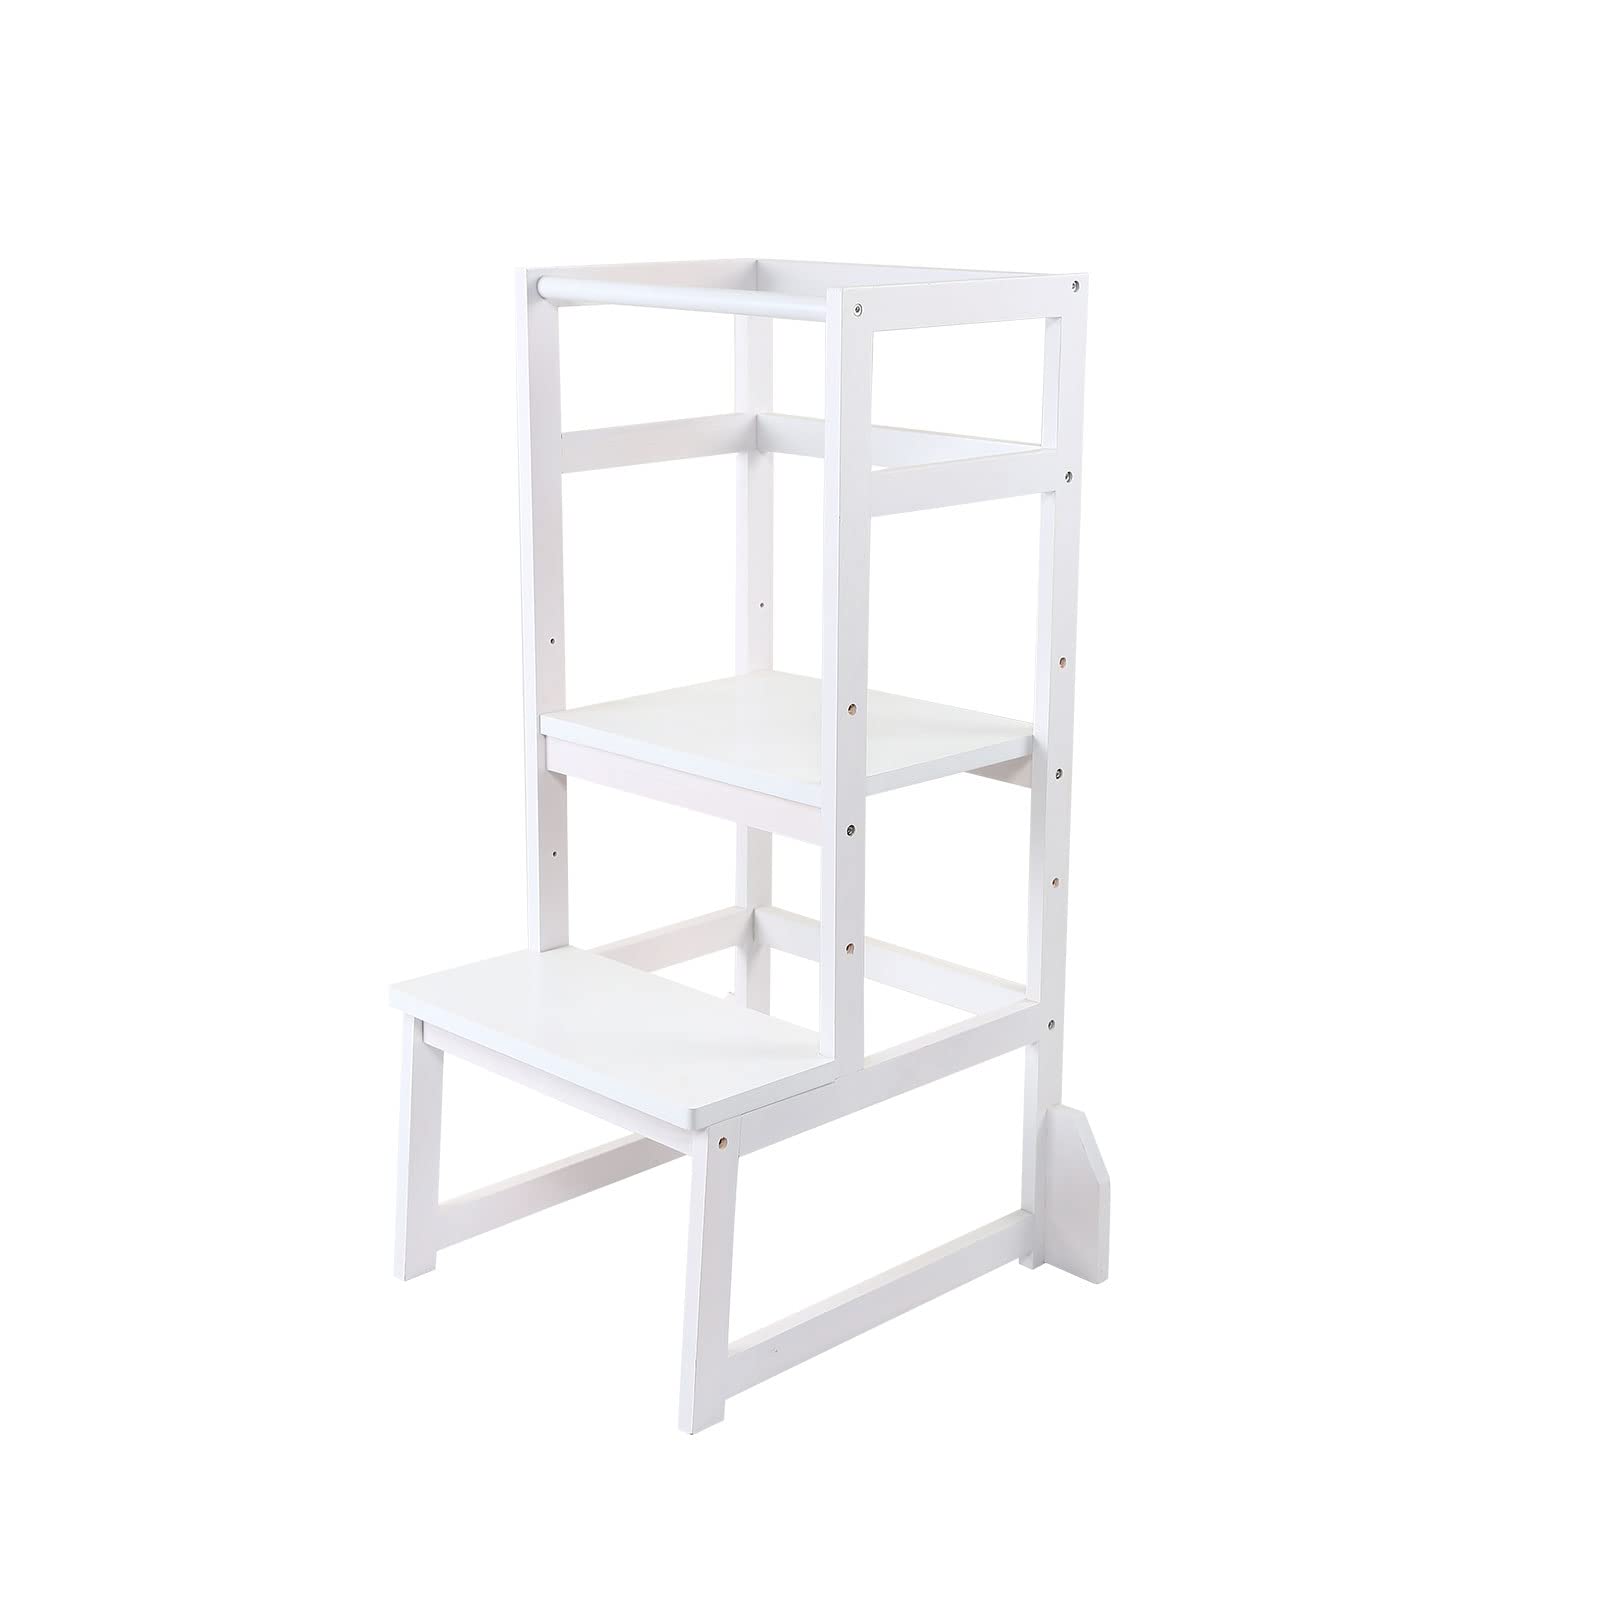 Zytty Toddler Step Stool Learning Tower Toddler Kitchen Stool, Adjustable-Height Toddler Tower Stool Step stools for Kids, White